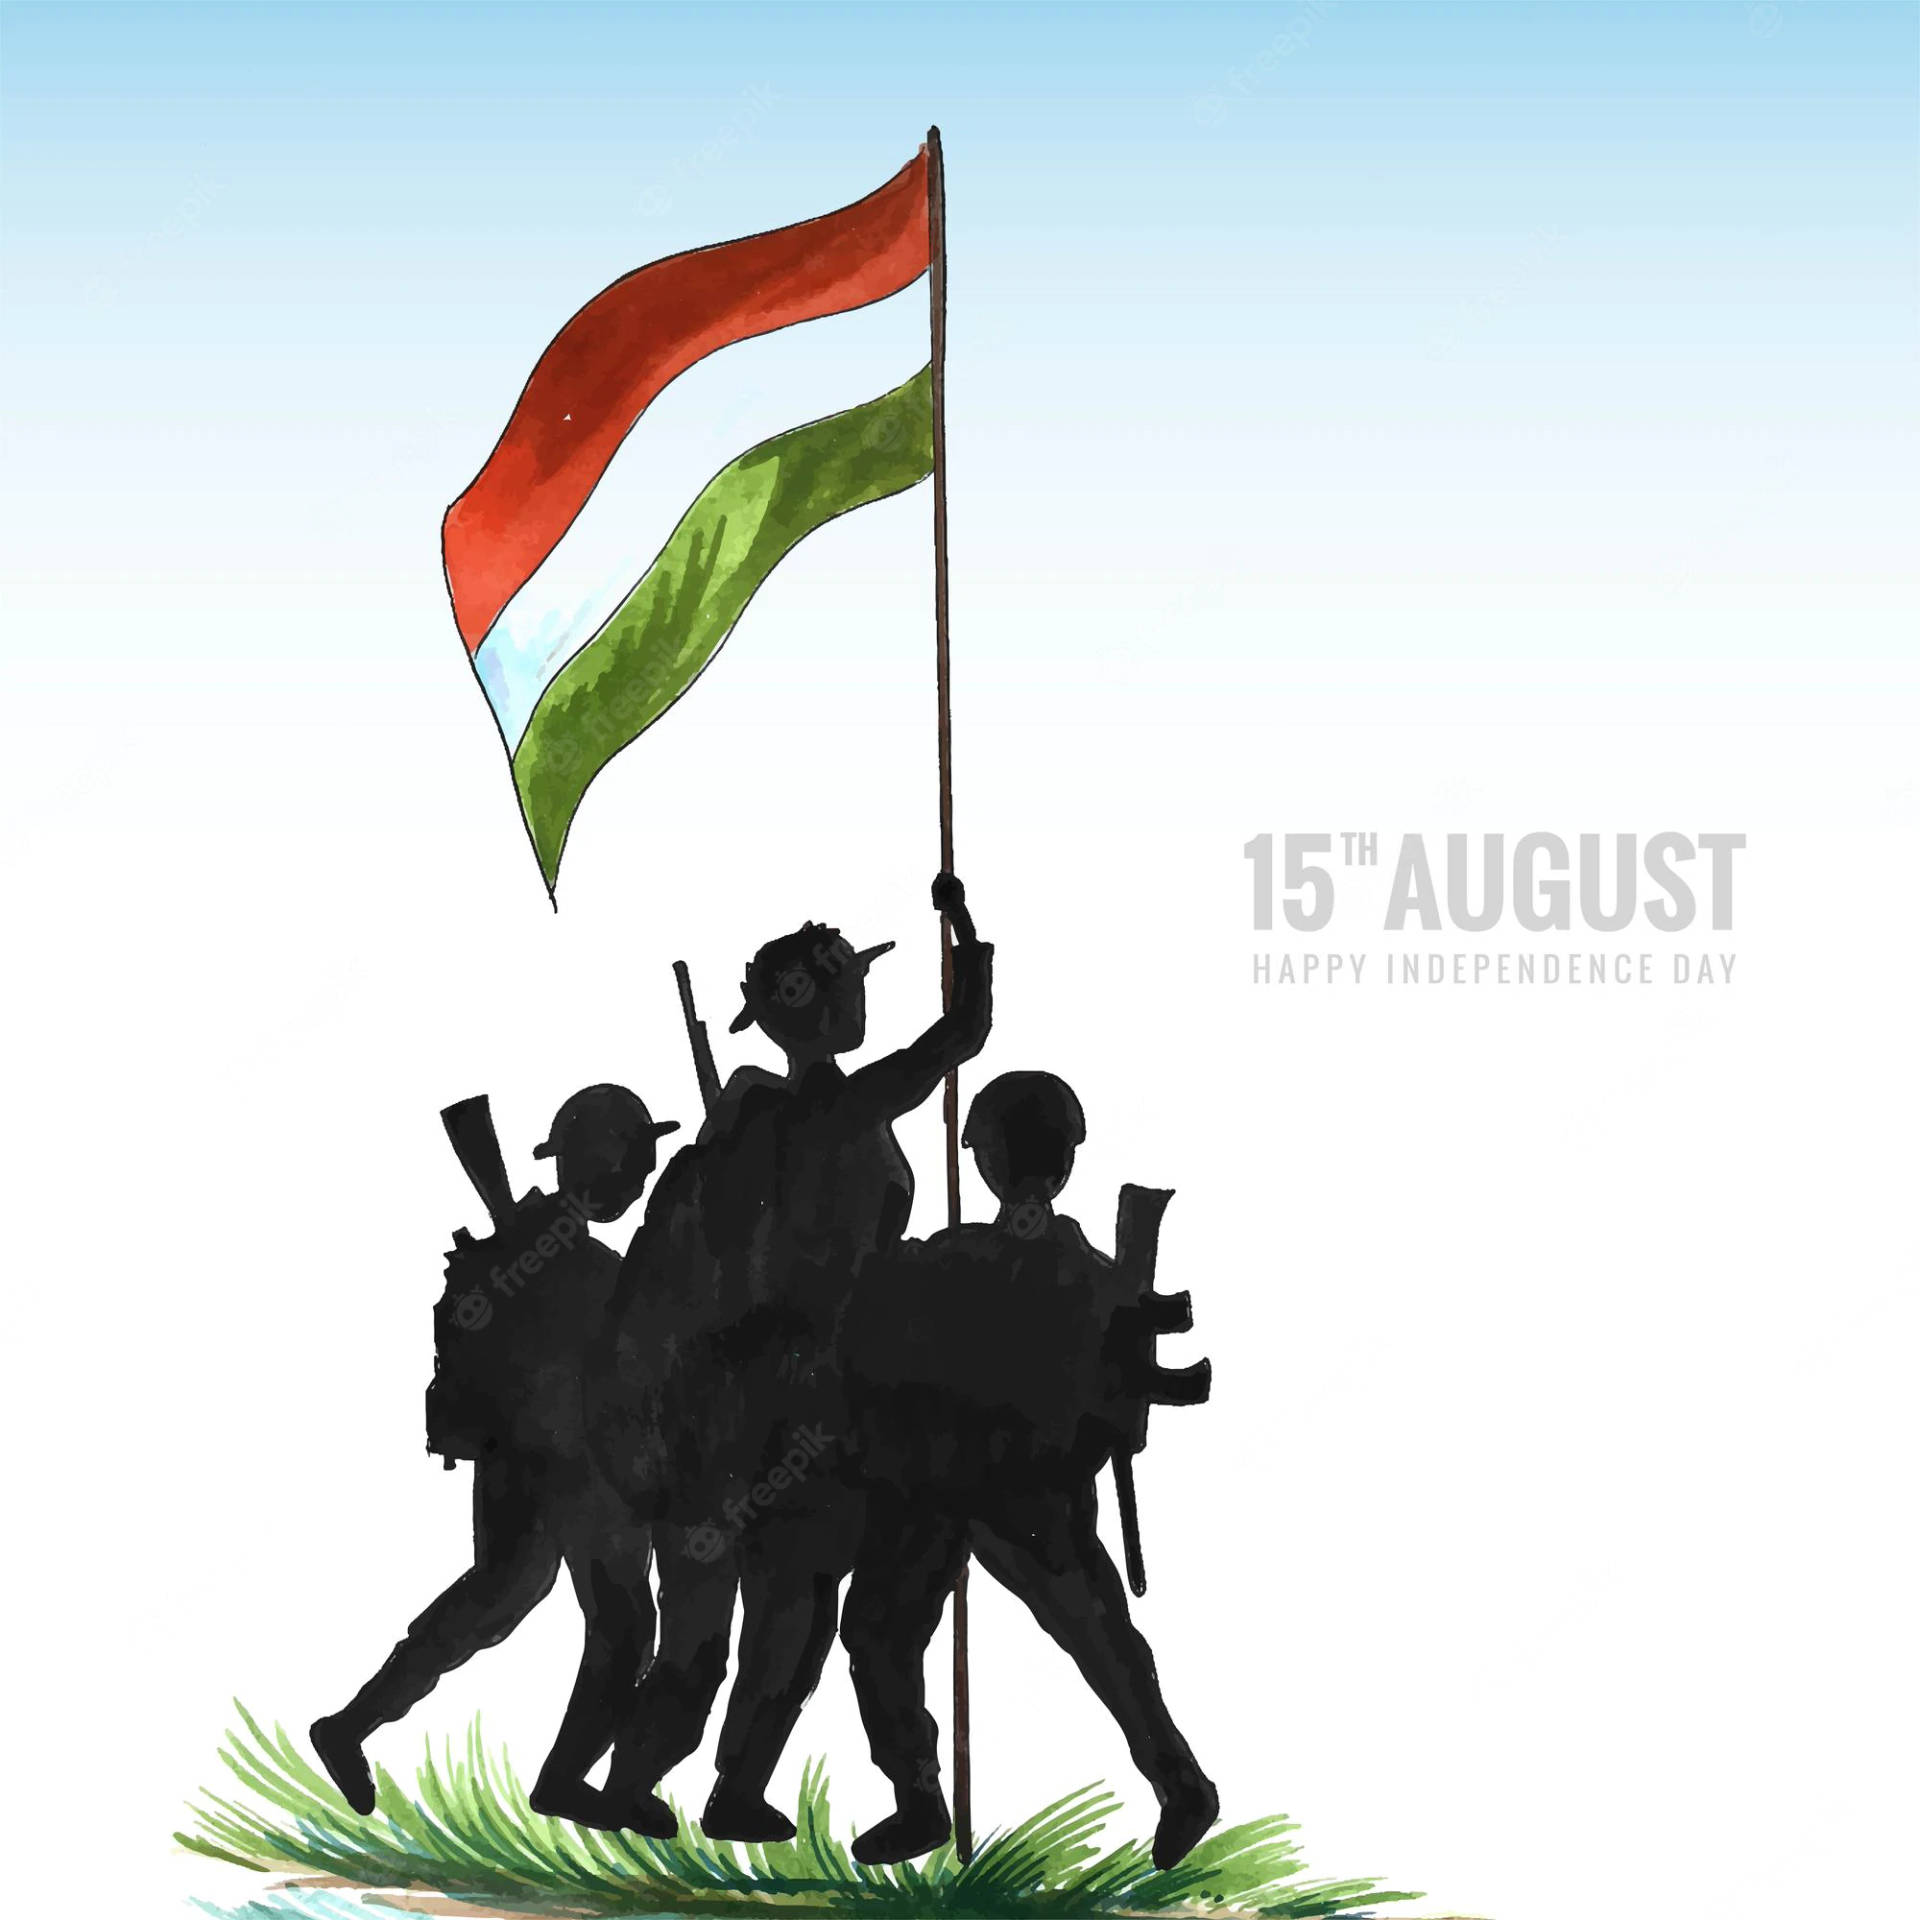 Indian Soldiers Independence Day Cartoon Wallpaper